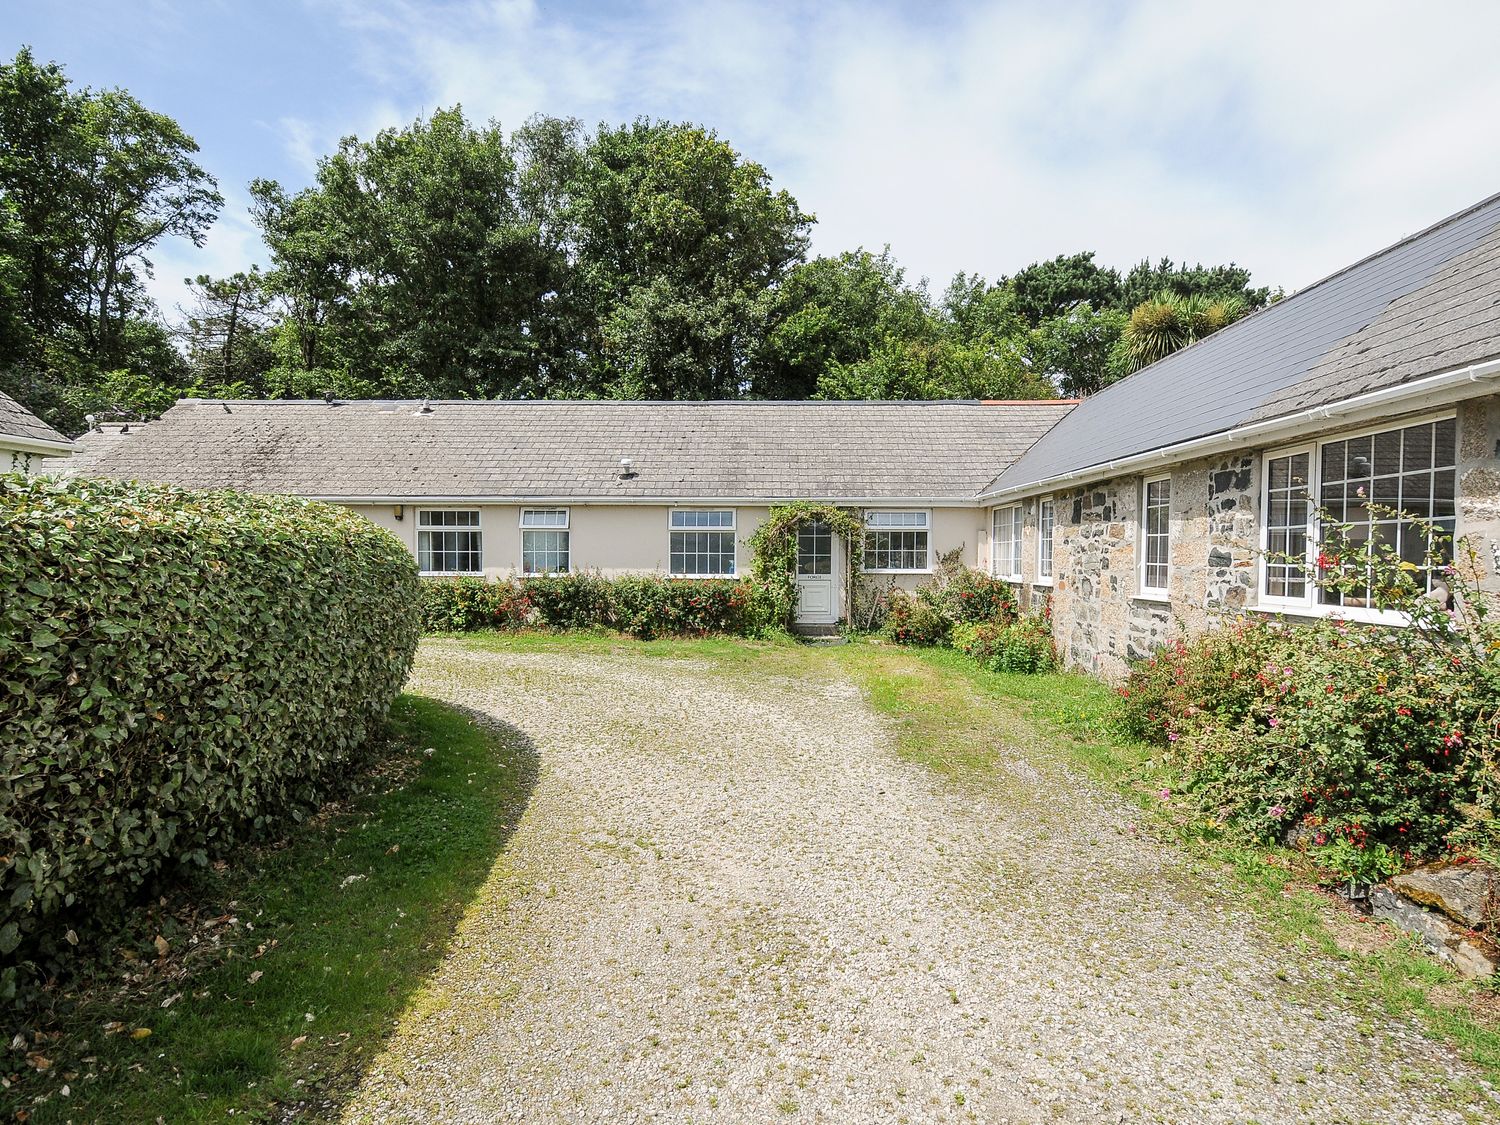 Forge Cottage - Cornwall - 1136877 - photo 1